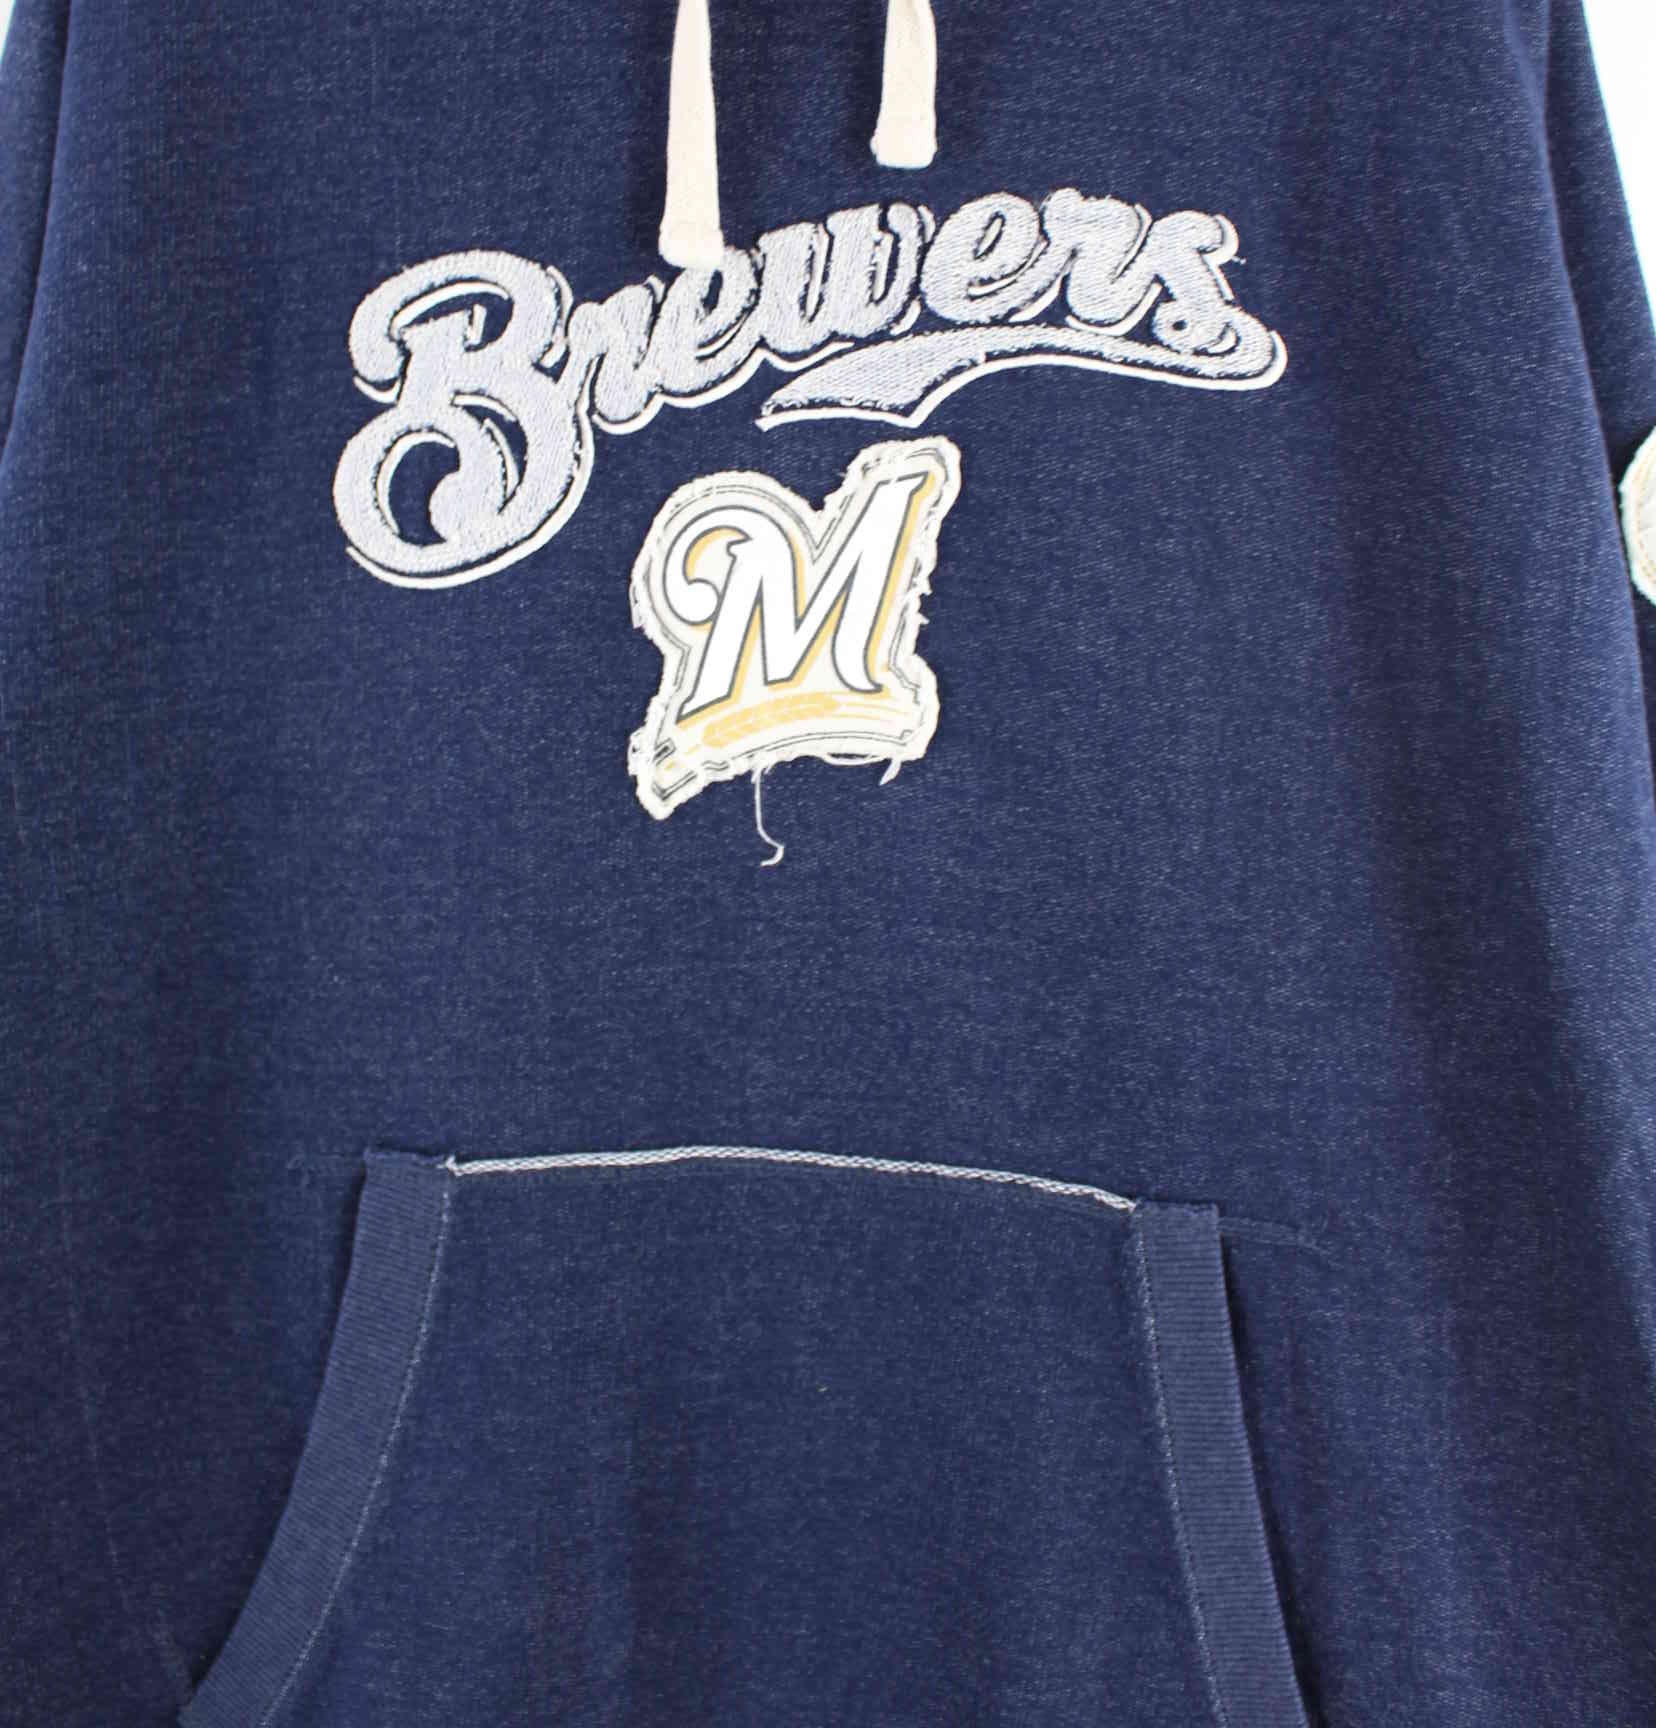 Majestic Brewers Embroidered Hoodie Blau XXL (detail image 1)